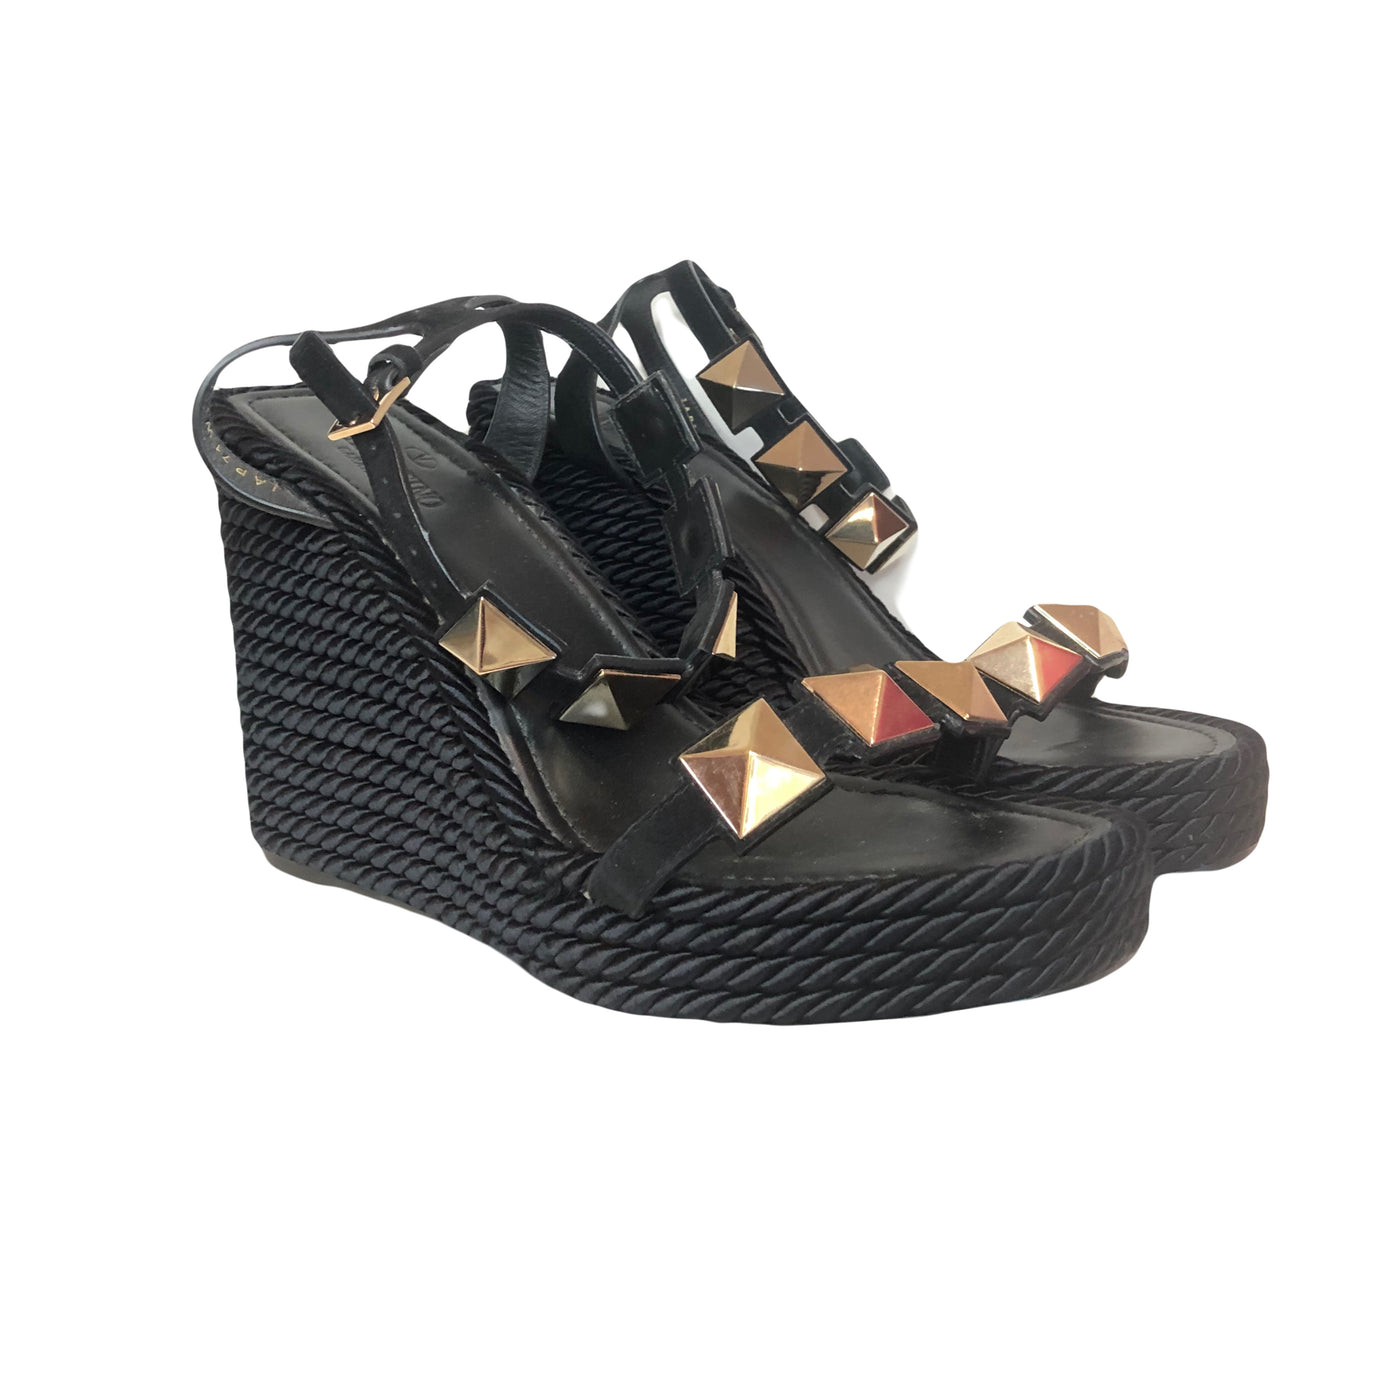 VALENTINO Rockstud gold cord wedges size 41